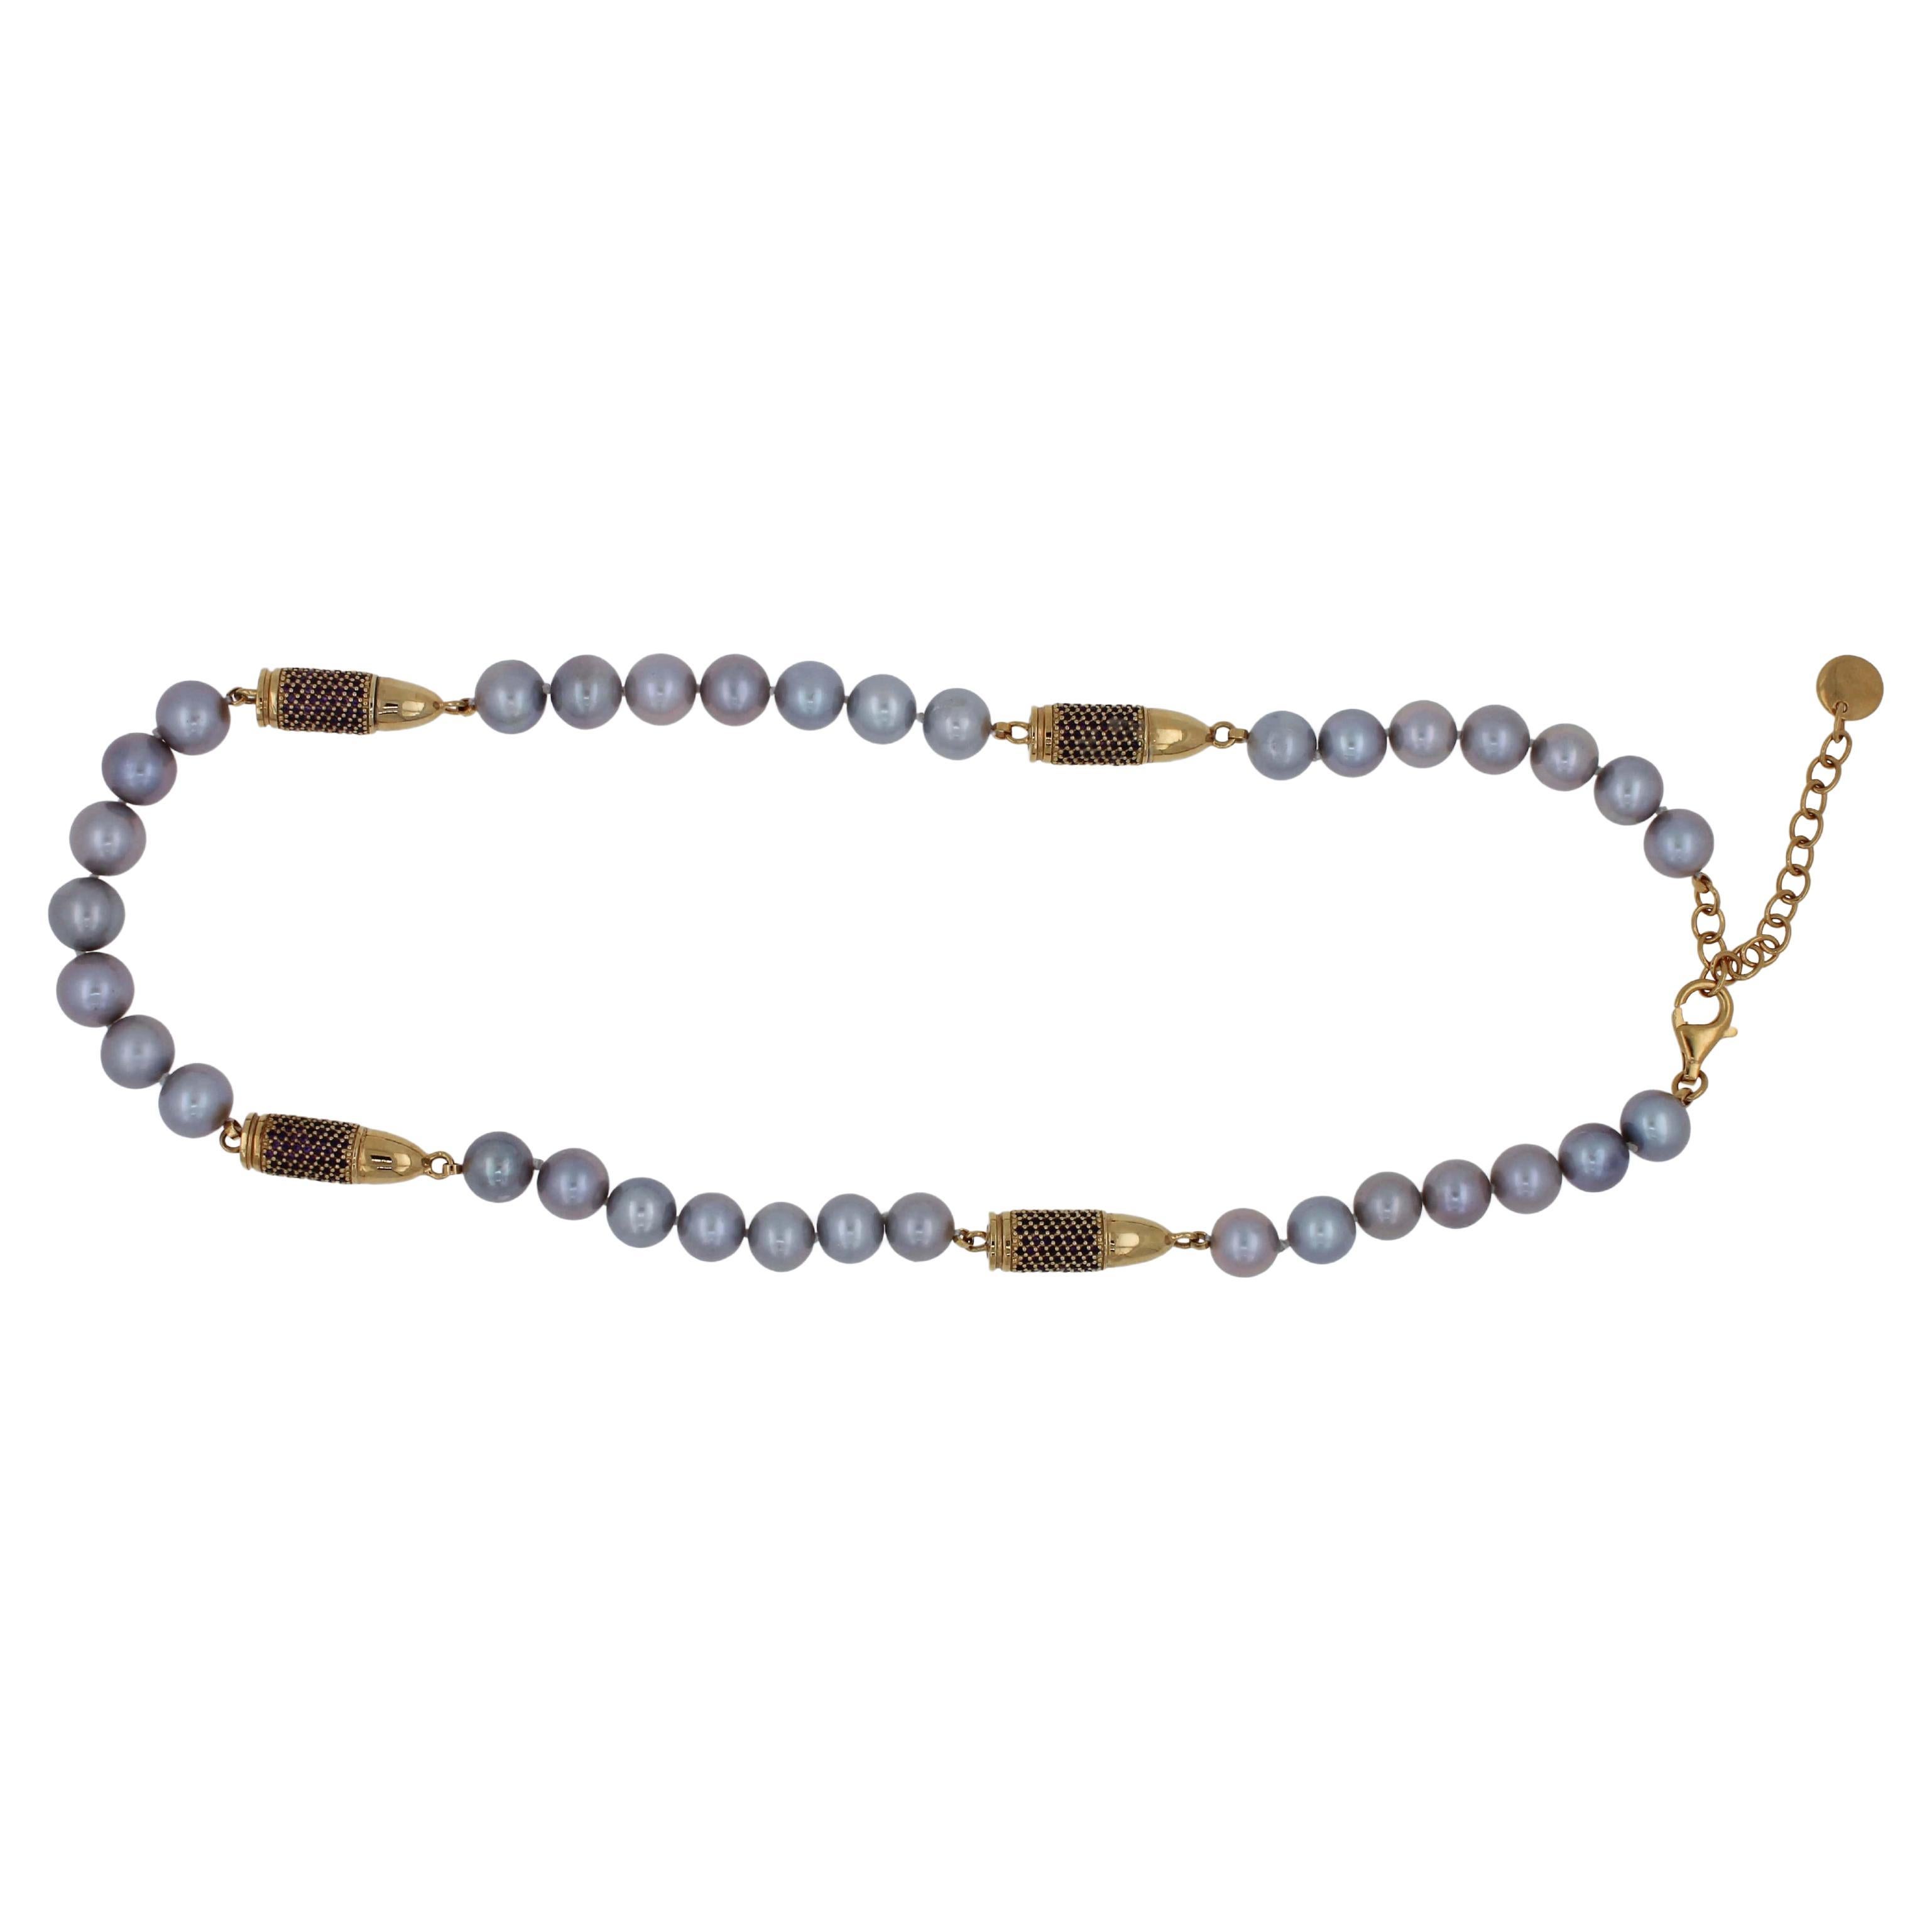 Purple Amethyst Pave Set Gold Bullet Rocket Grey Pearl Silver Vermeil Necklace
*Genuine Purple Amethysts Gemstones 5.00 CTW
* Natural Silver Pearls
* 18K Yellow Gold Vermeil
* 18 to 20 Inches Adjustable Clasp